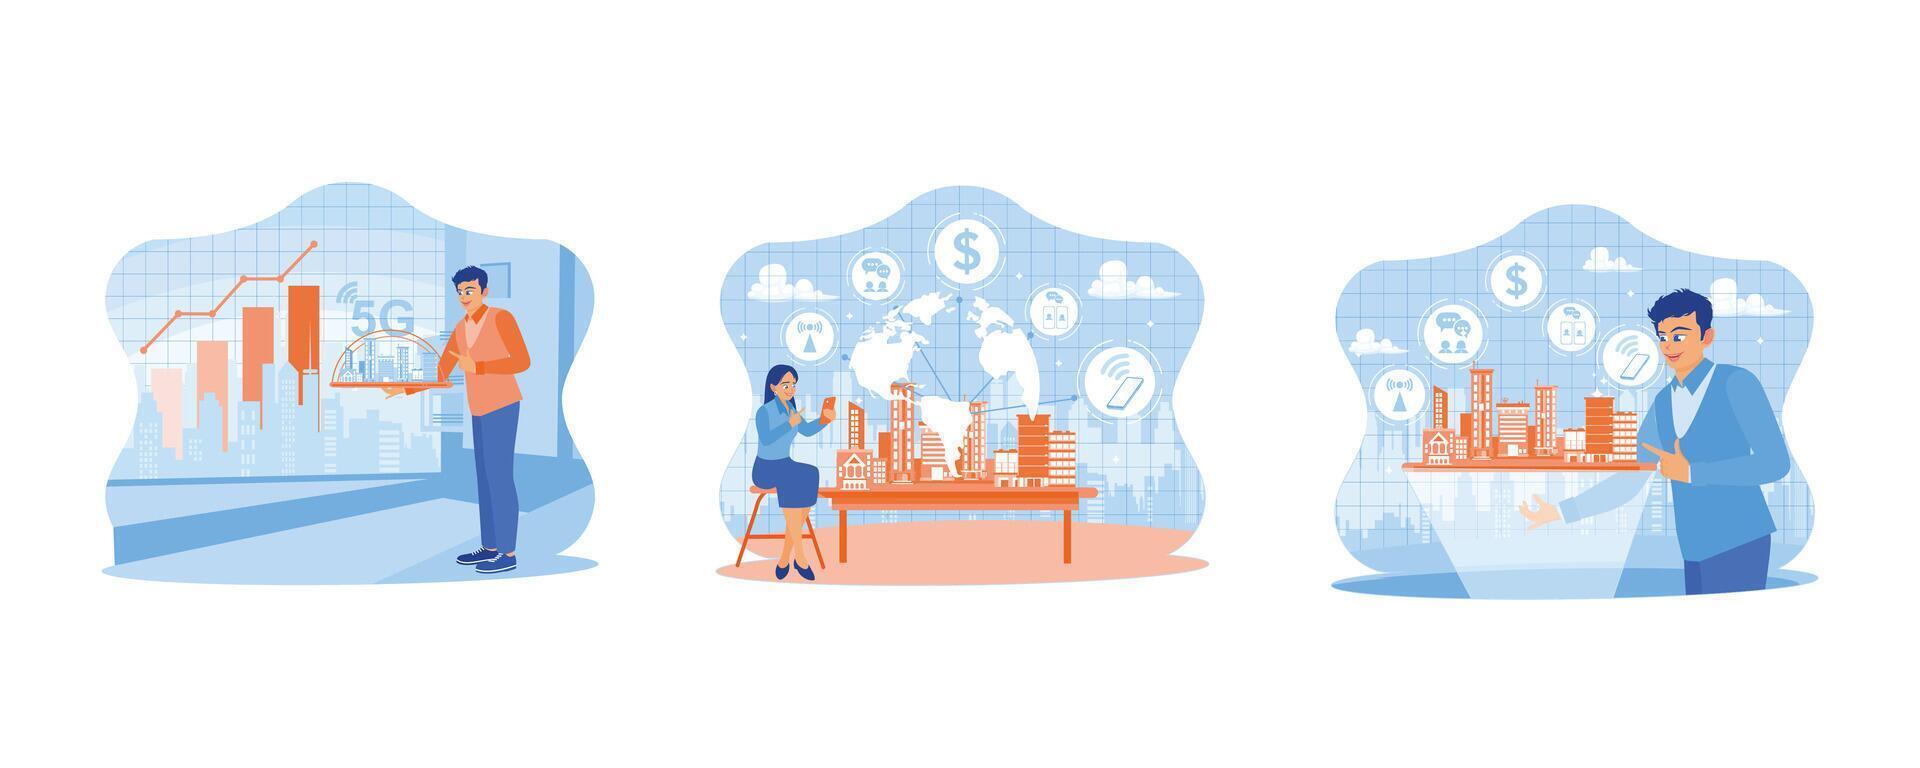 Telecommunication and internet in smart city concept. Man holding a miniature smart city. Woman sitting next to a small smart city. Businessman standing against a backdrop of sketchy urban buildings. vector